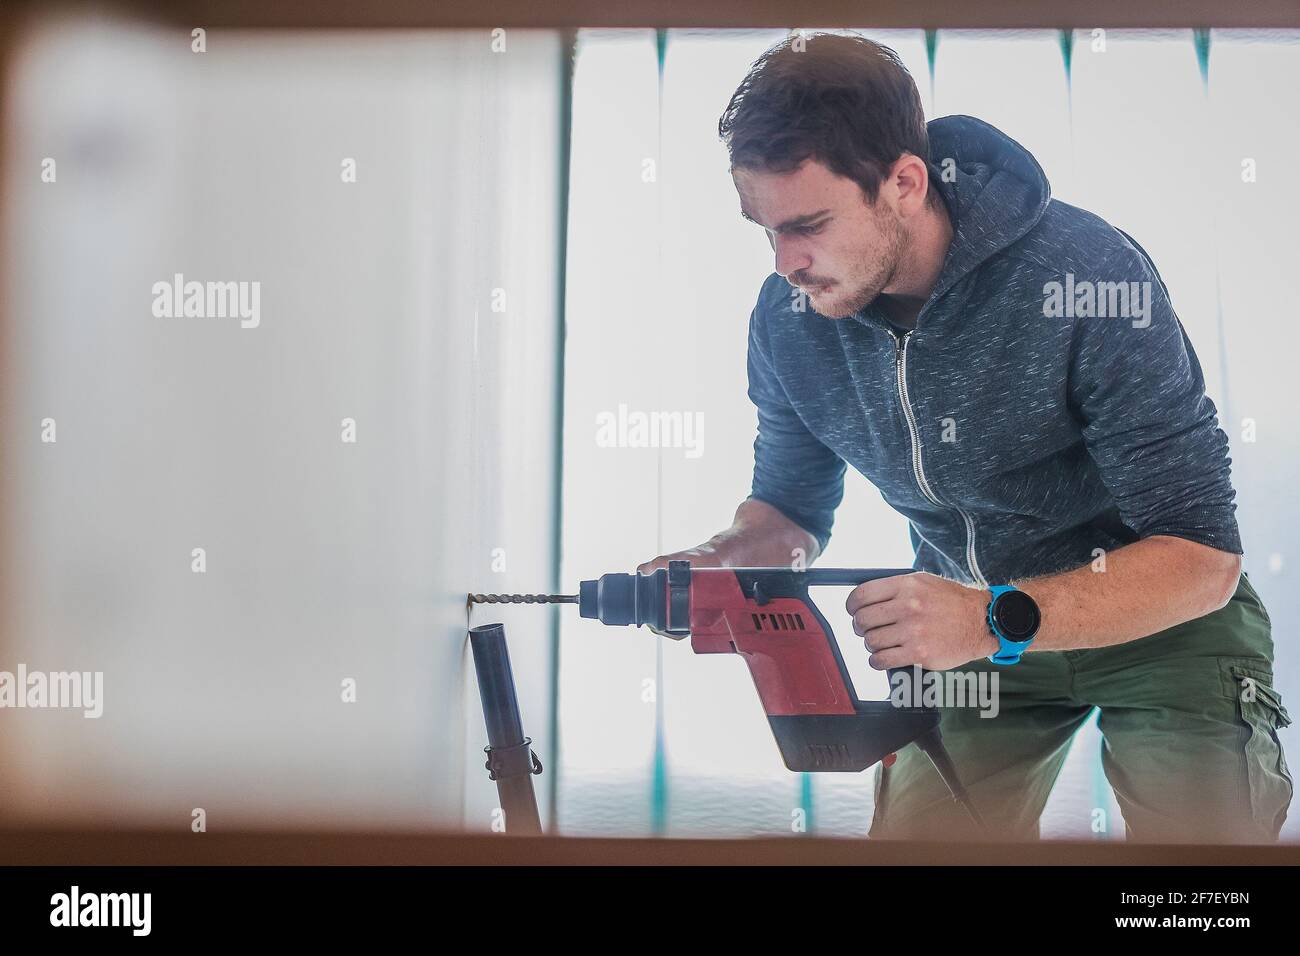 Man using an electric power drill to make a hole in the wall. Visible vacuum cleaner hose to suck in the debris. Stock Photo